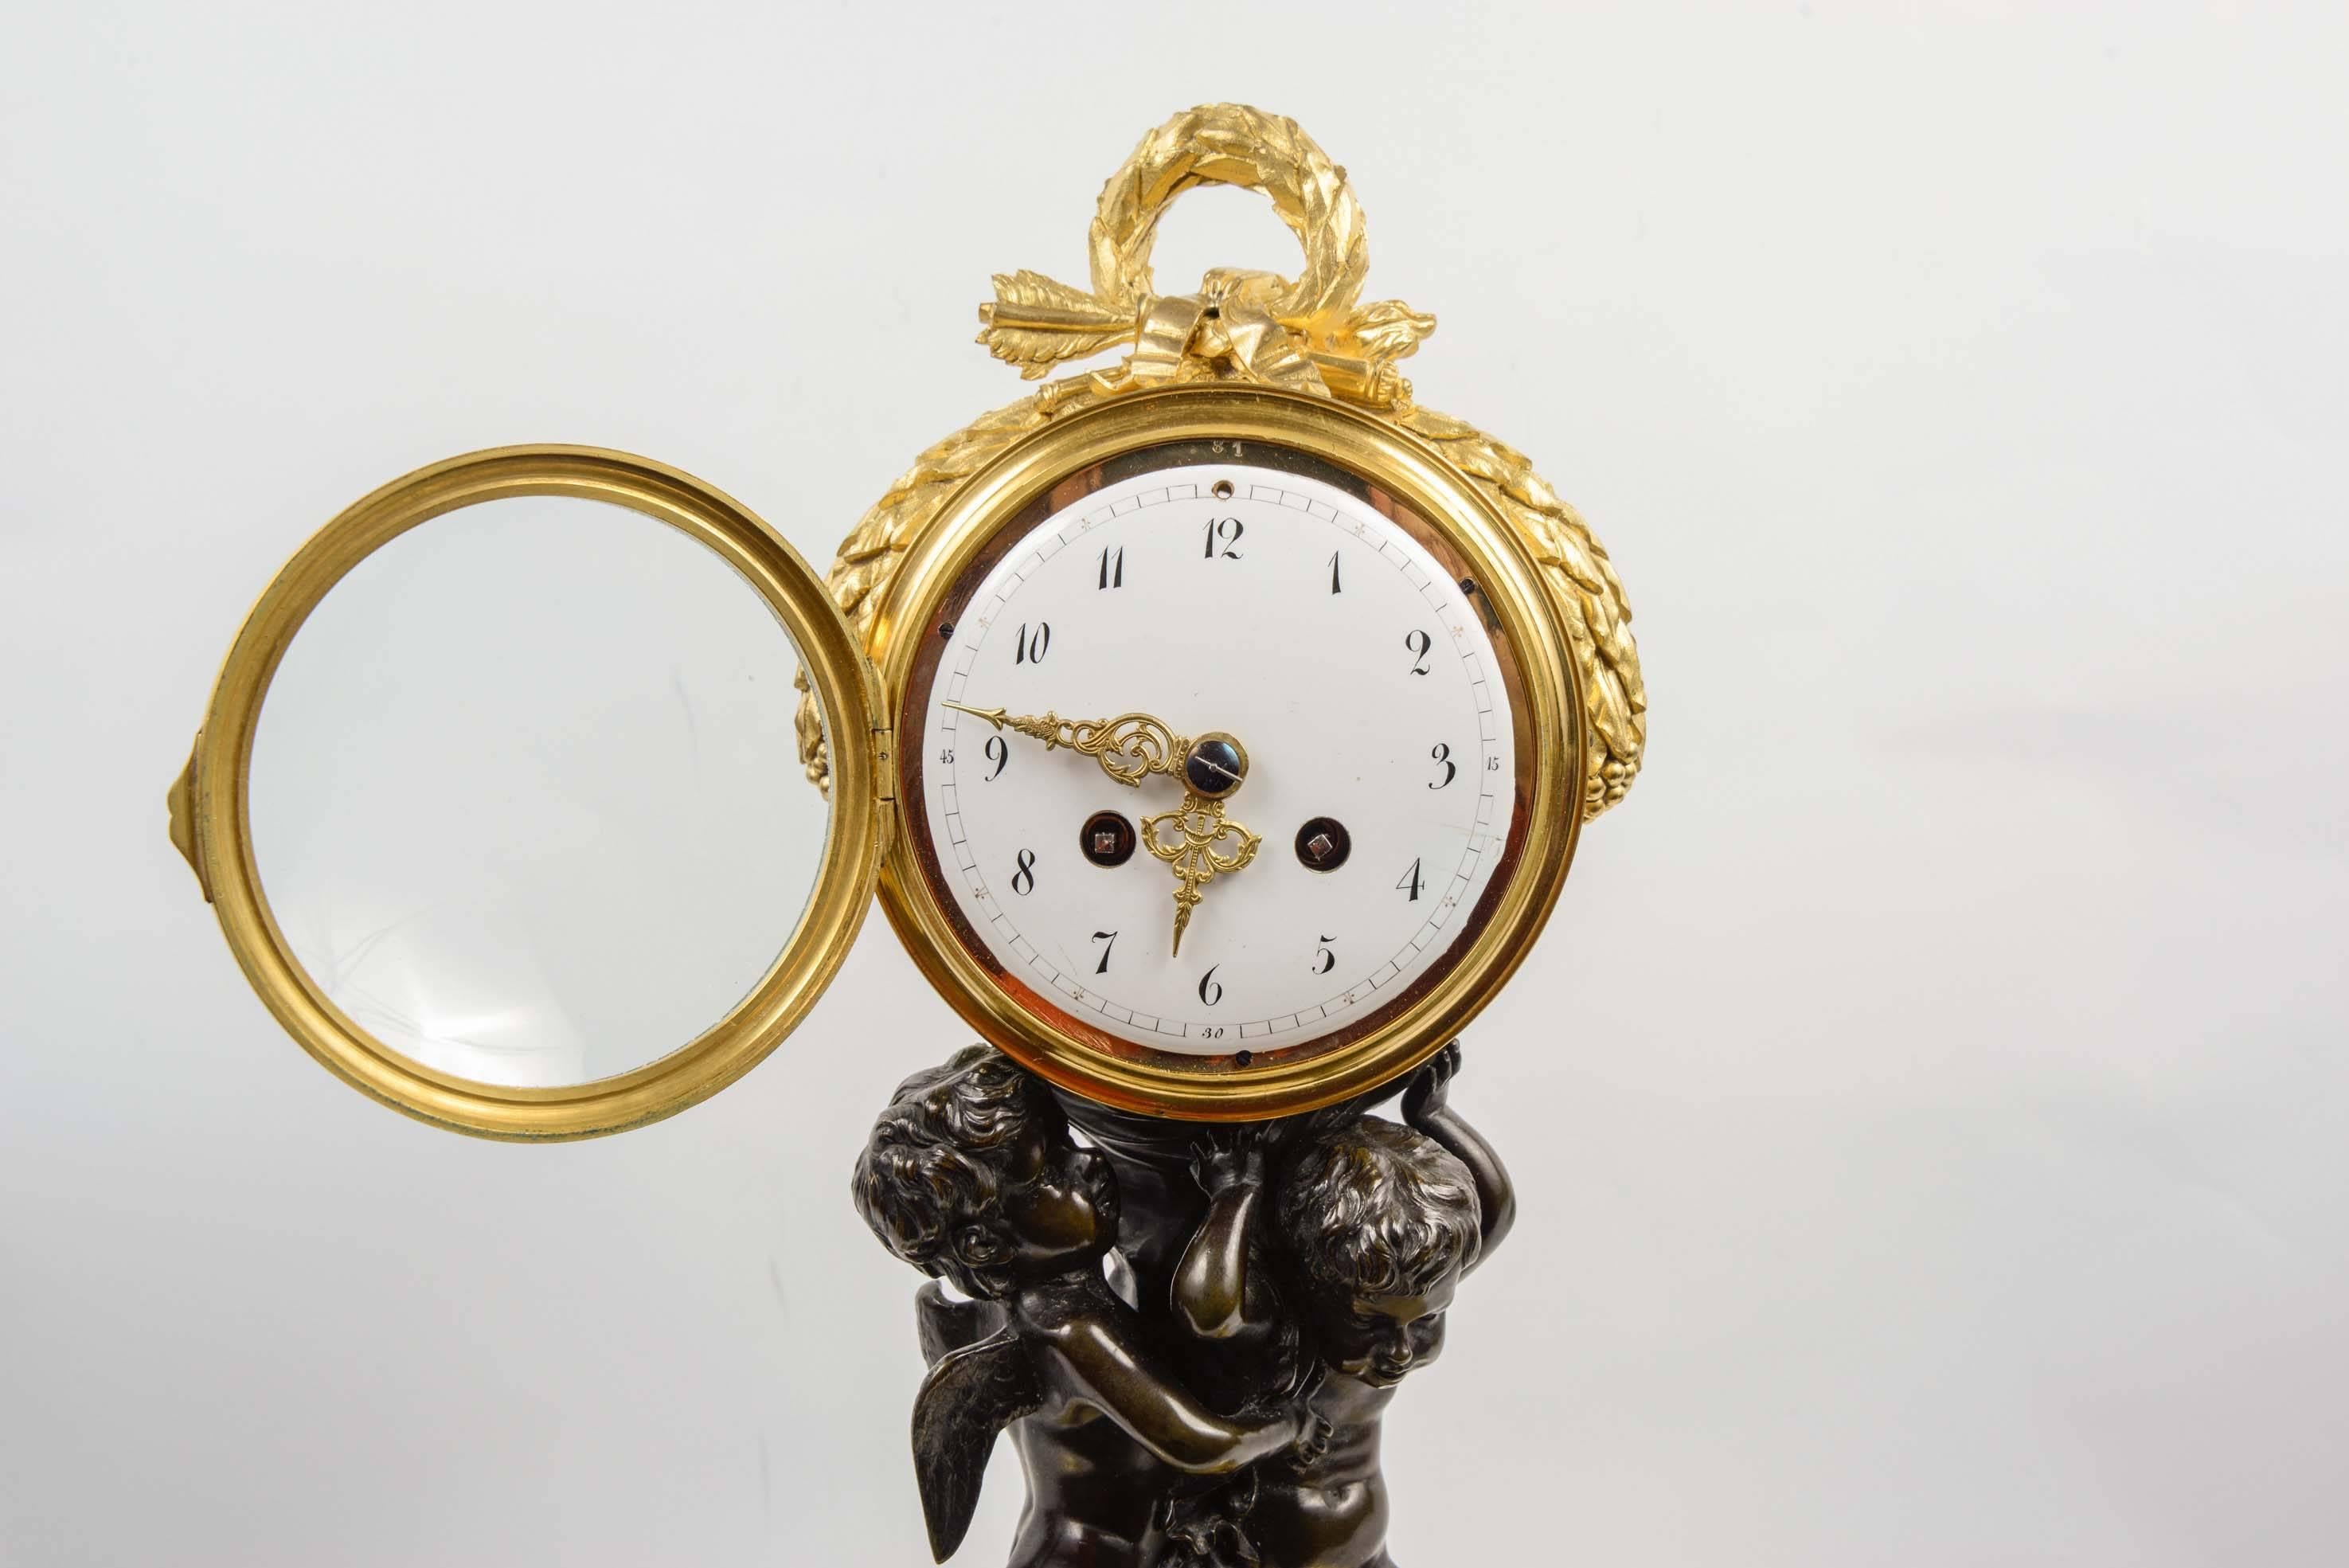 Very charming horloge in the style of Louis XVI, double patina and gilded bronze, two brown patina bronze puttis standing on a gilded bronze base, holding the movement of the clock.